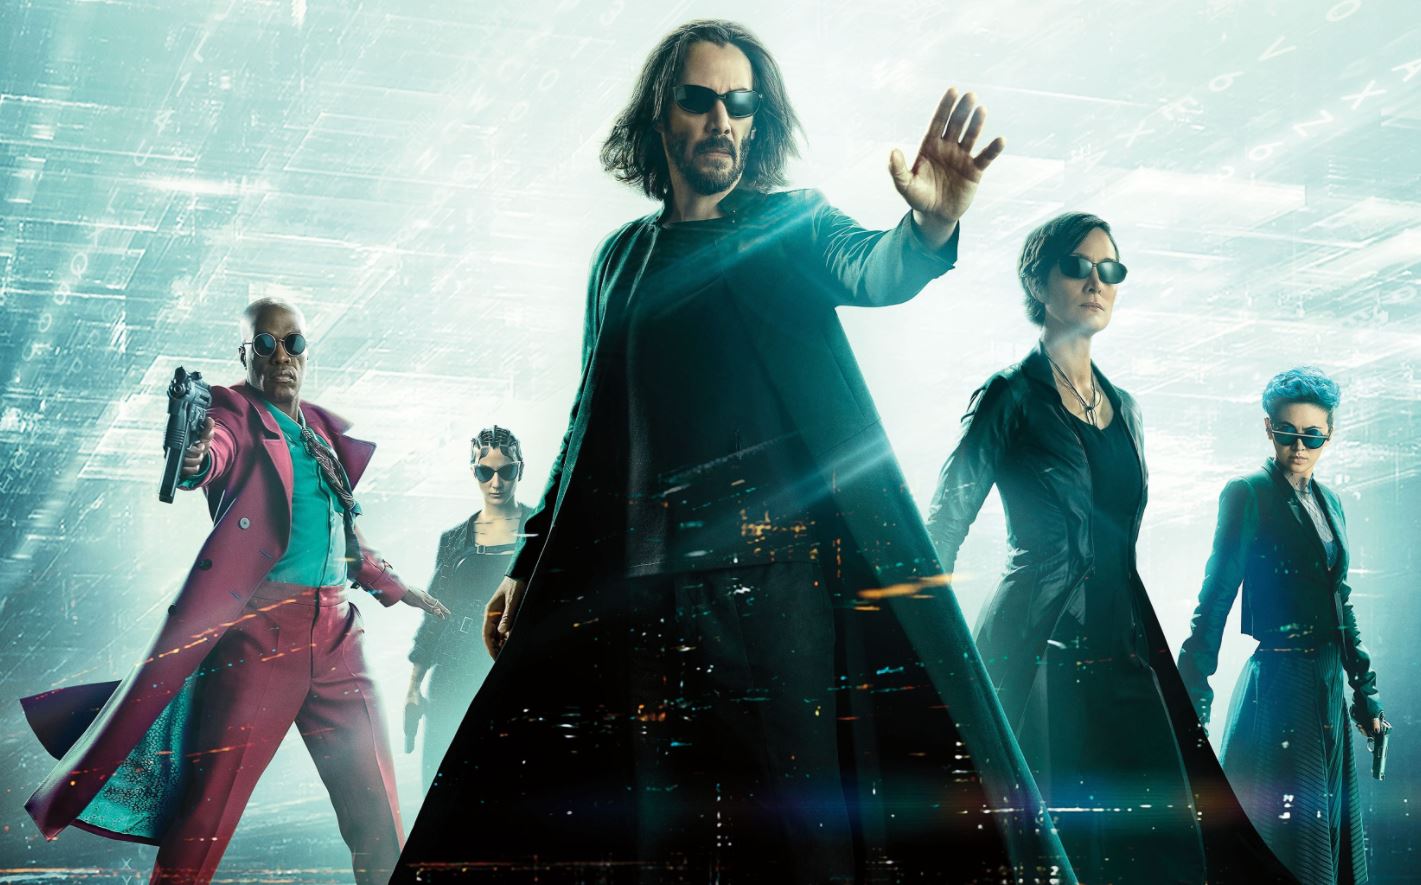 Action Movies, Science Fiction Movies, The Matrix Resurrections 2021, Watch The Matrix Resurrections 2021 Free Online, See Movies The Matrix Resurrections 2021 Free Online, Watch Film The Matrix Resurrections 2021 Free Online, The Matrix Resurrections 2021 Full Free Online